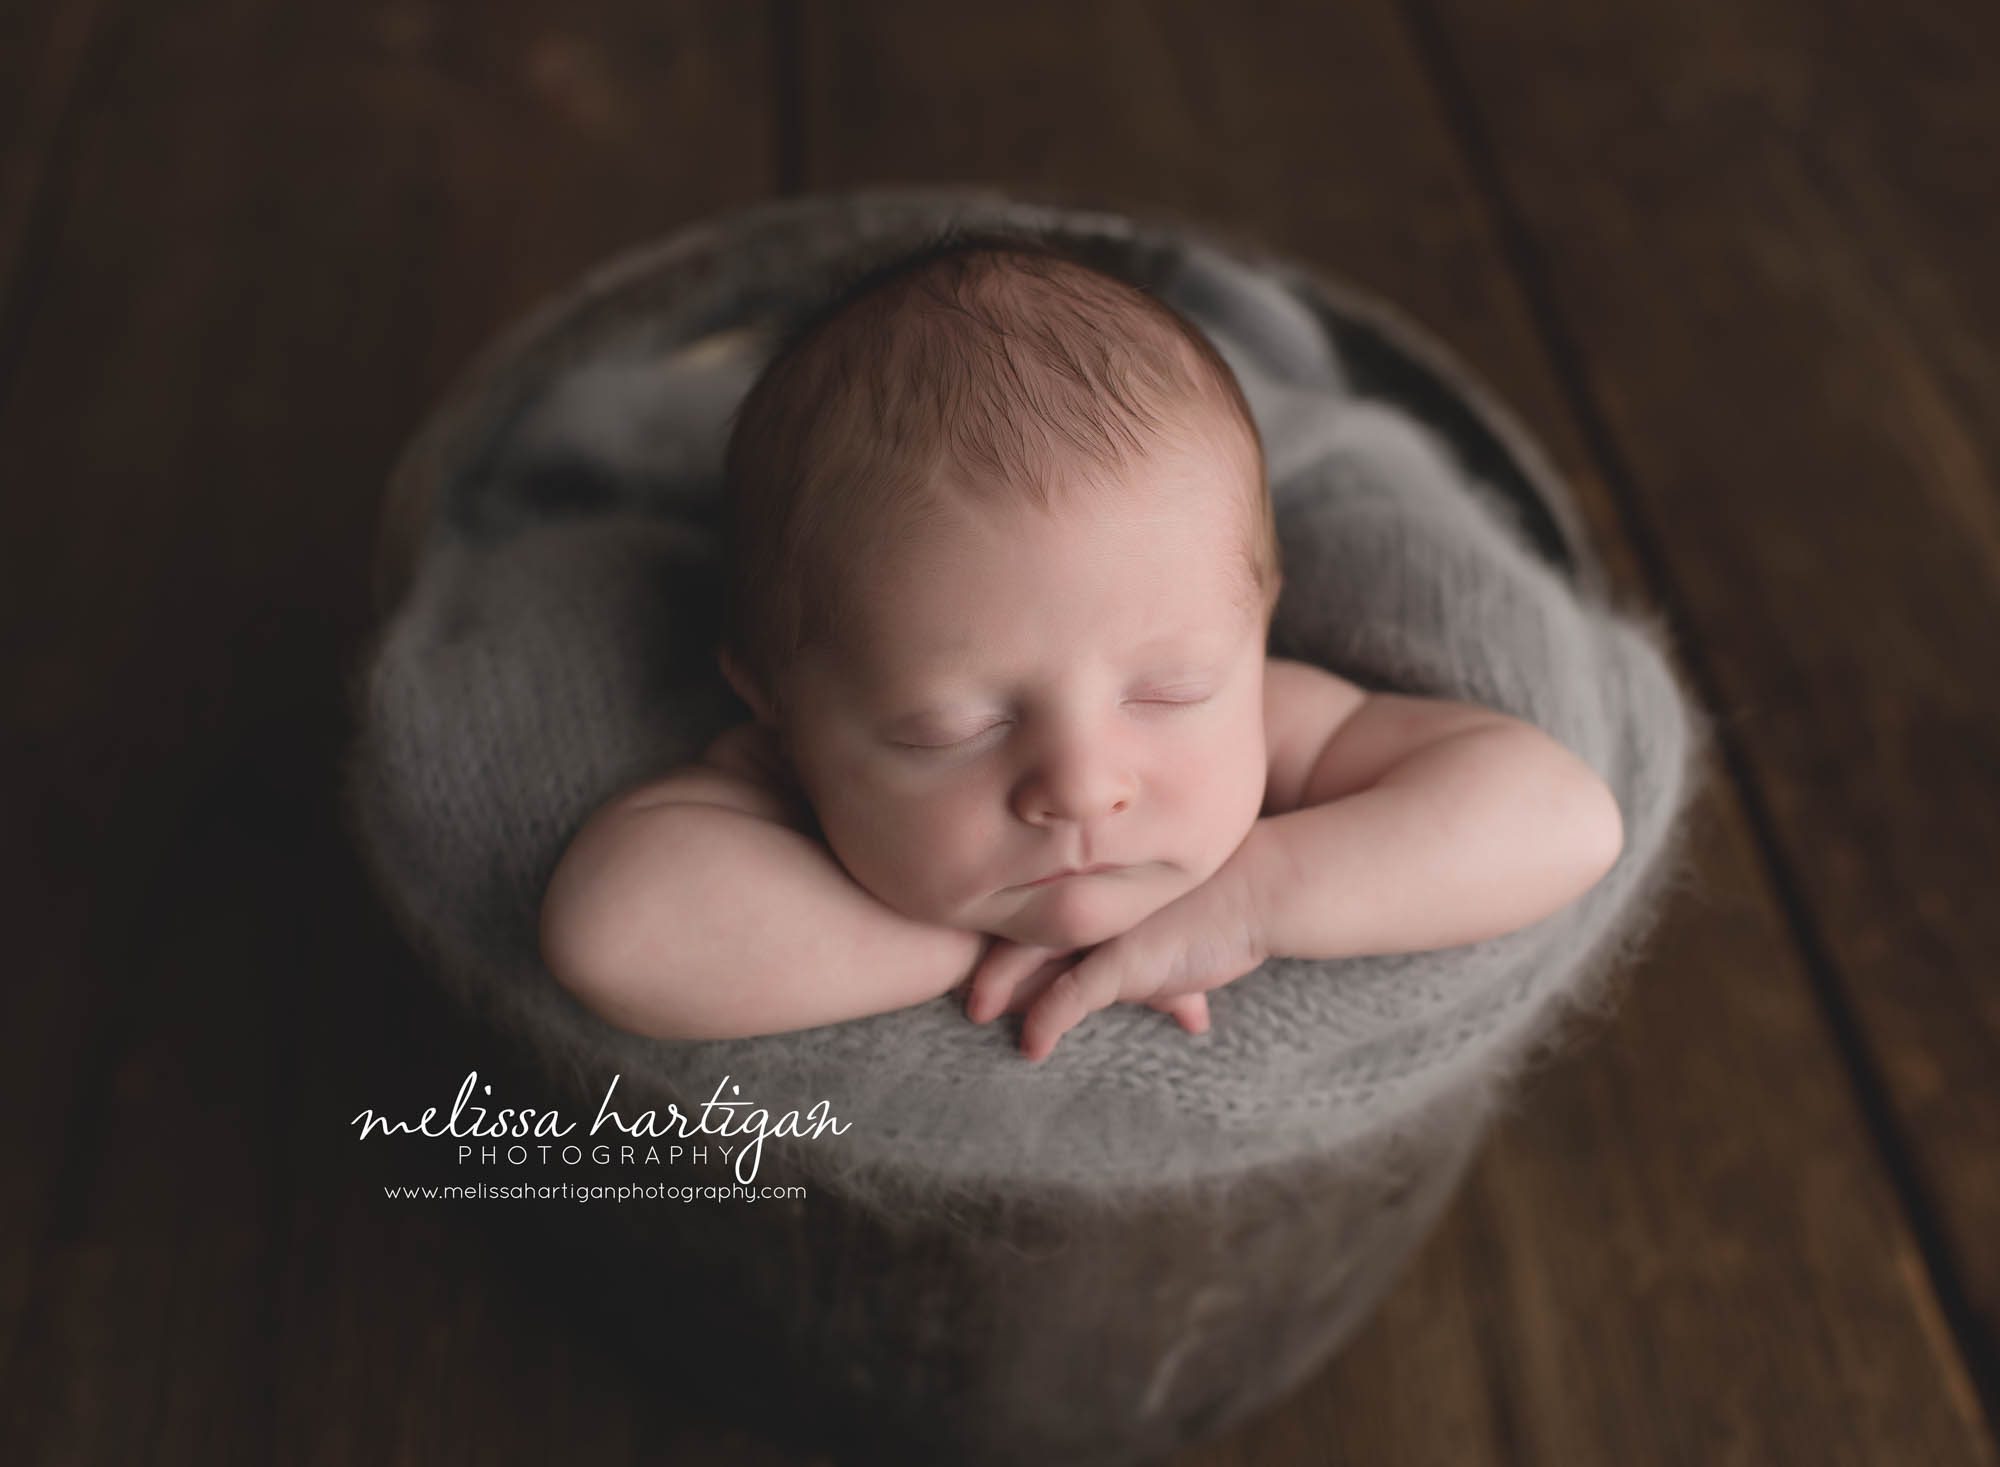 Melissa Hartigan Photography Coventry CT Newborn & Maternity Photographer Coventry CT Maternity Newborn Session Chase sleeping in wooden bowl with gray knit blanket